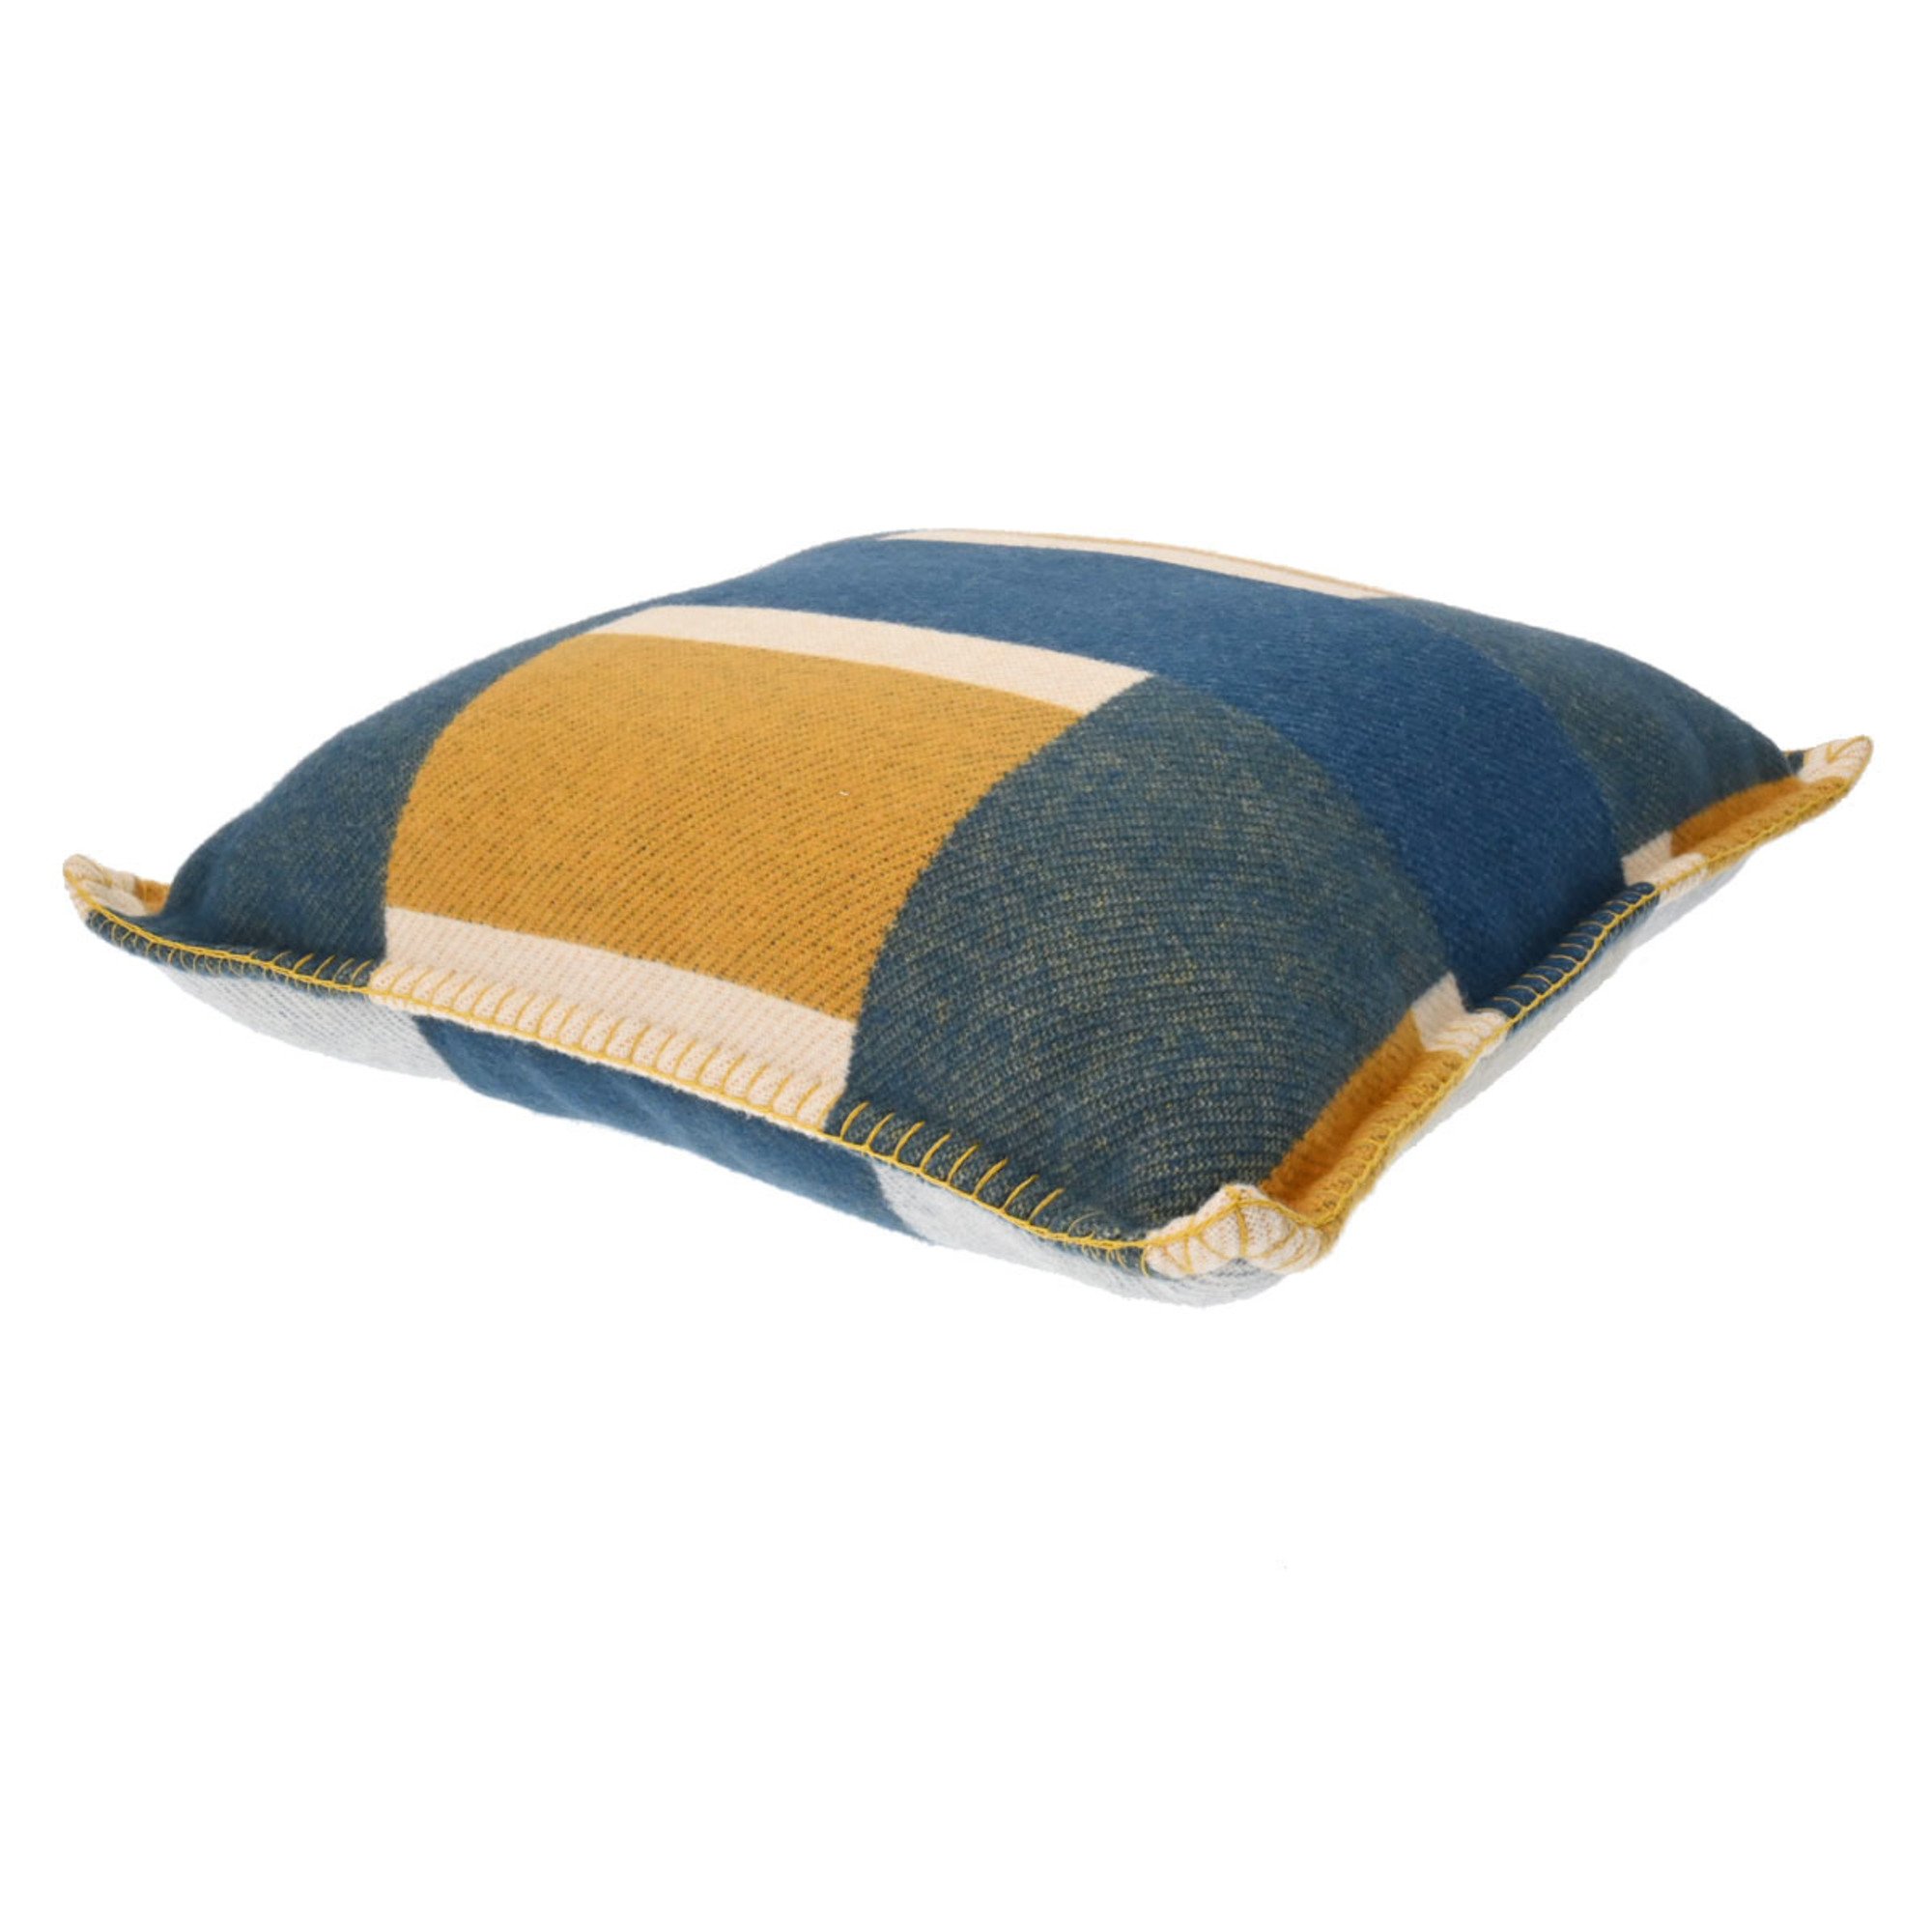 HERMES Cushion H Tissage Blue/Yellow Unisex 90% Wool/10% Cashmere Miscellaneous Goods